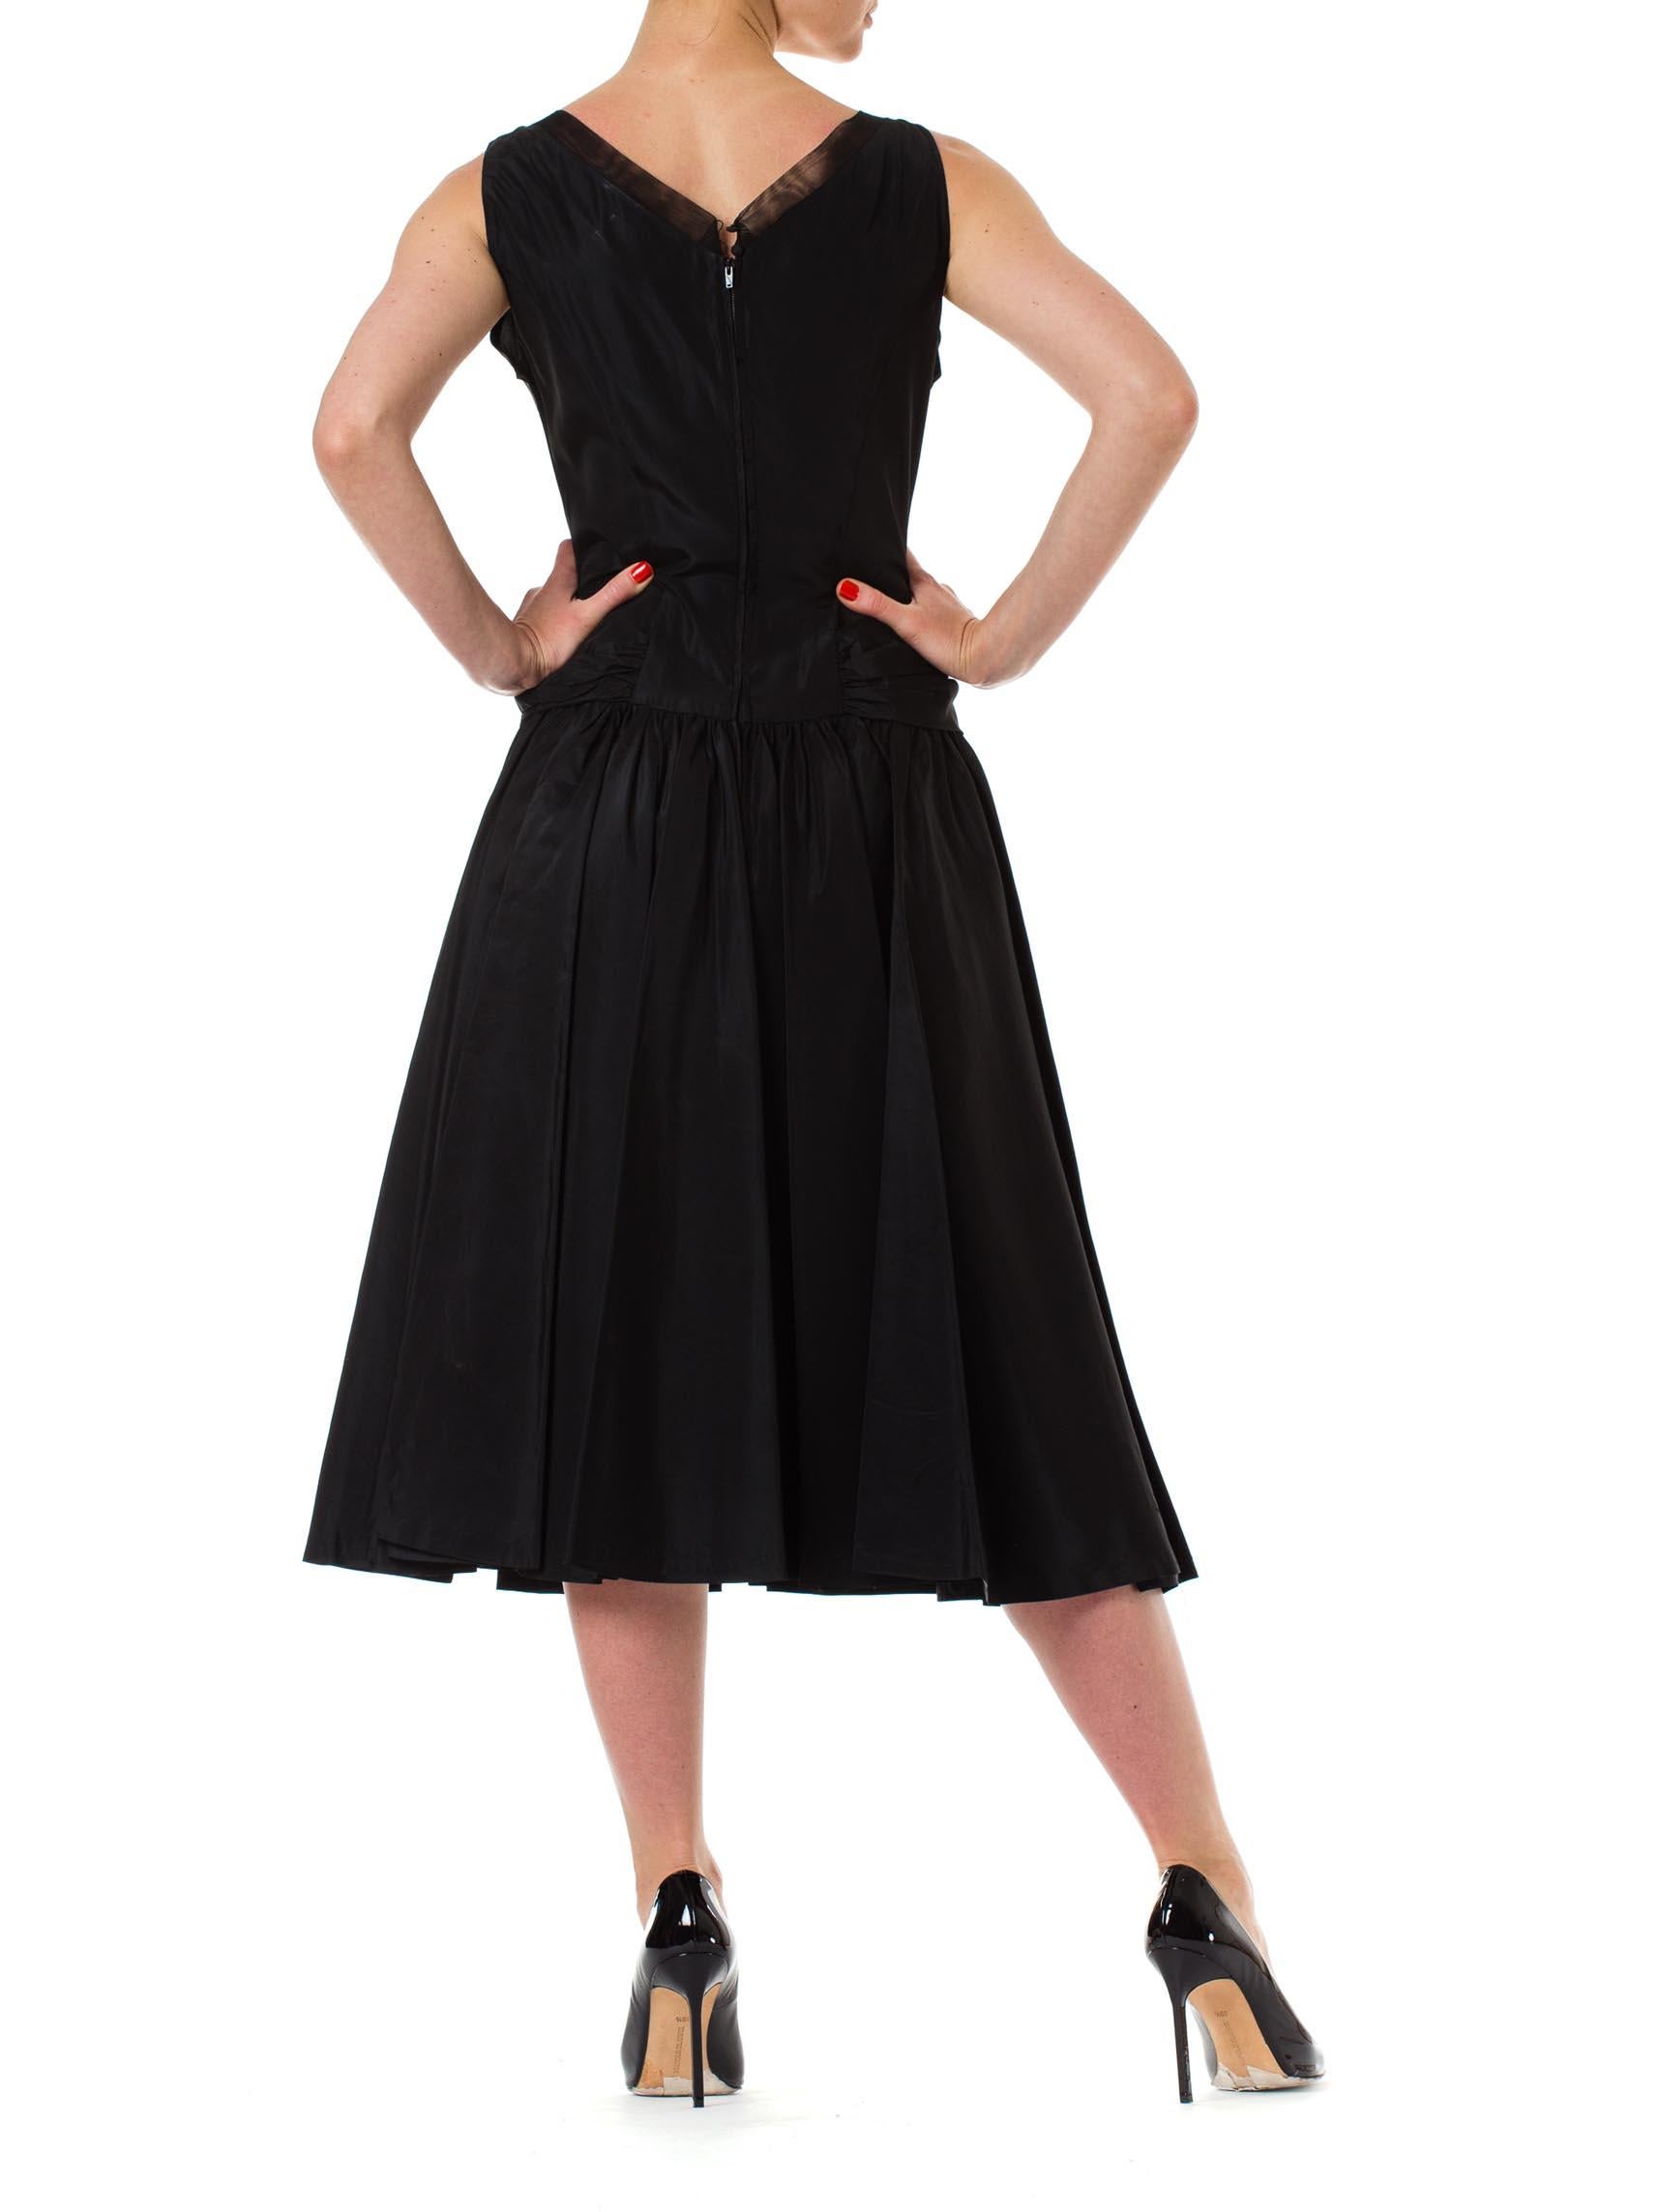 1950S Black Acetate Taffeta Swing Skirt Cocktail Dress With Unique Gathered Det For Sale 1